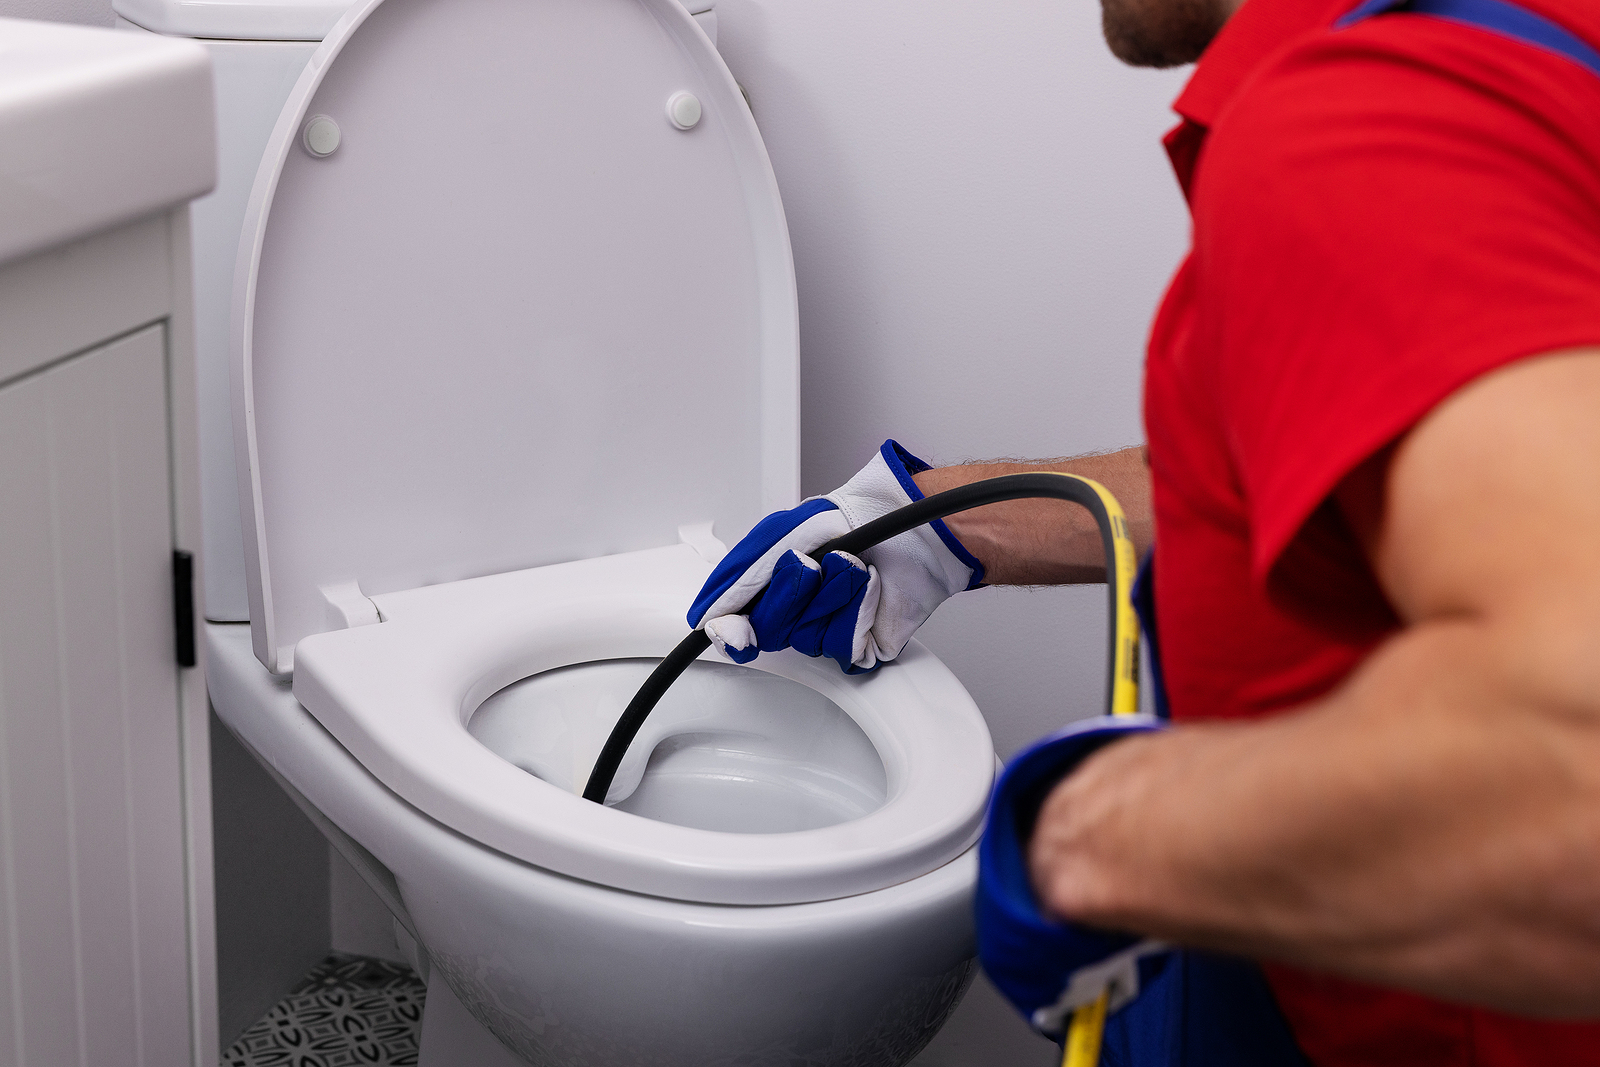 How to Unclog a Toilet Without a Plunger When the Water Is High